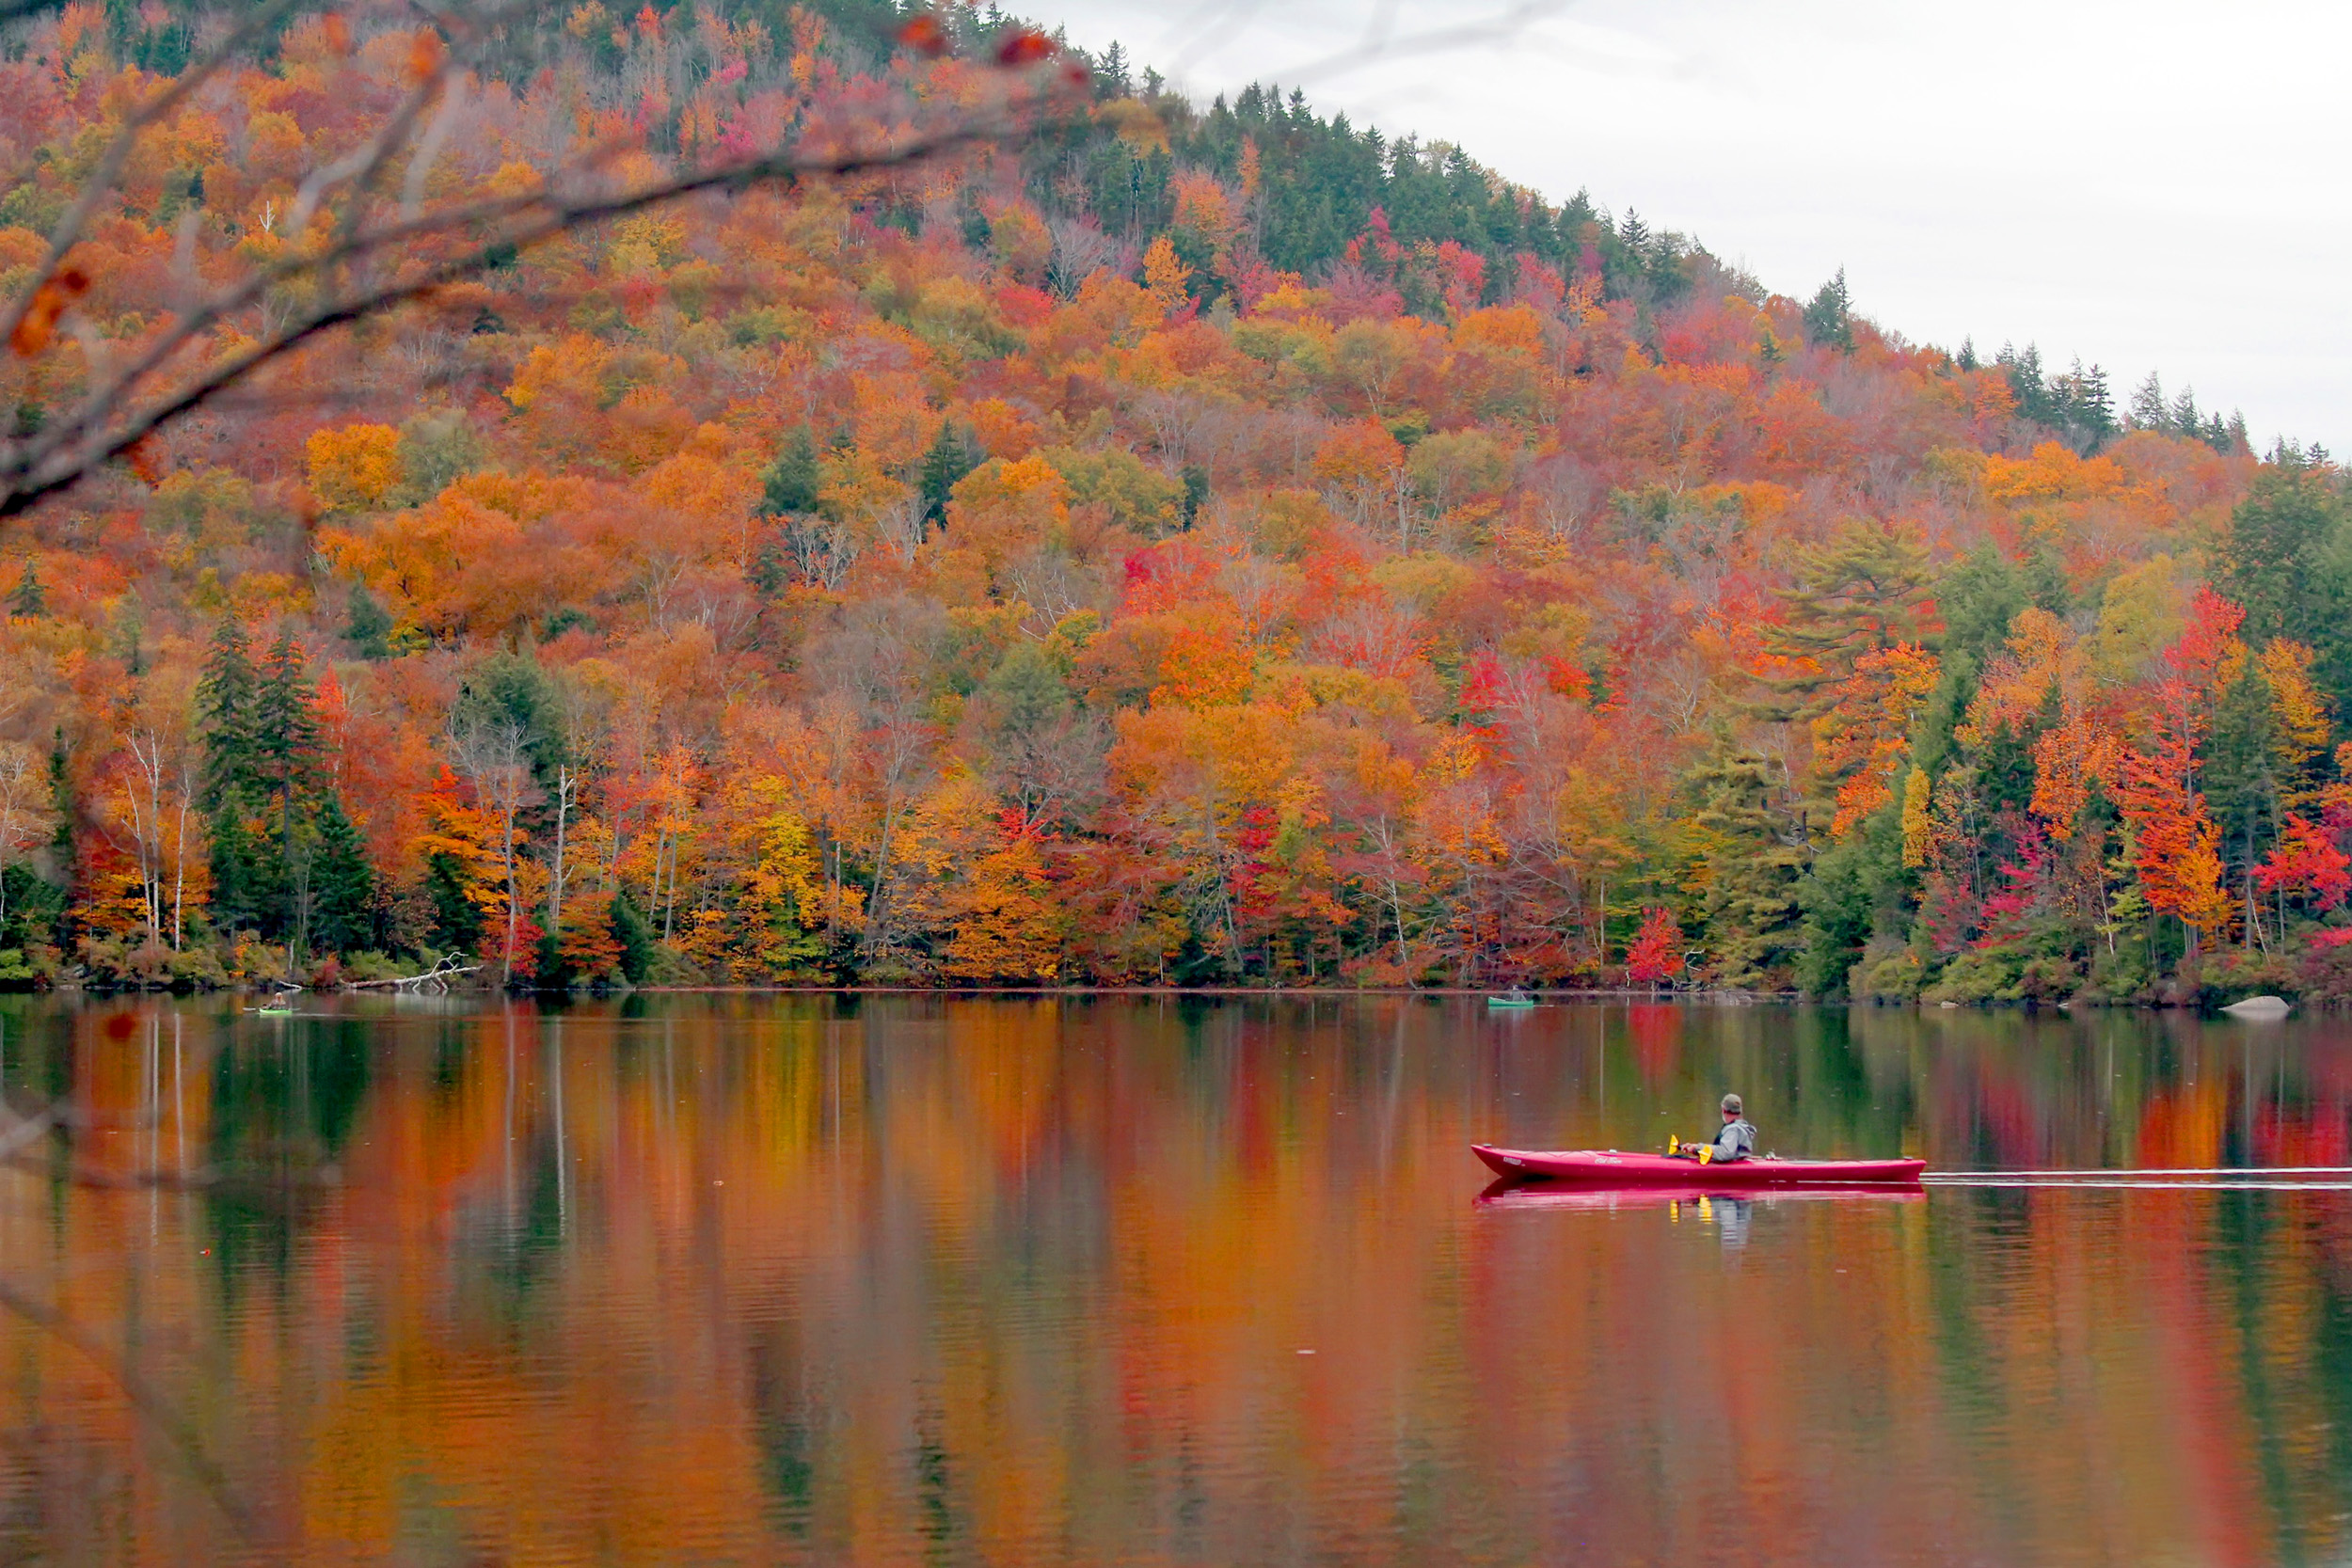 kyaking in vermont with fall foliage during retirement